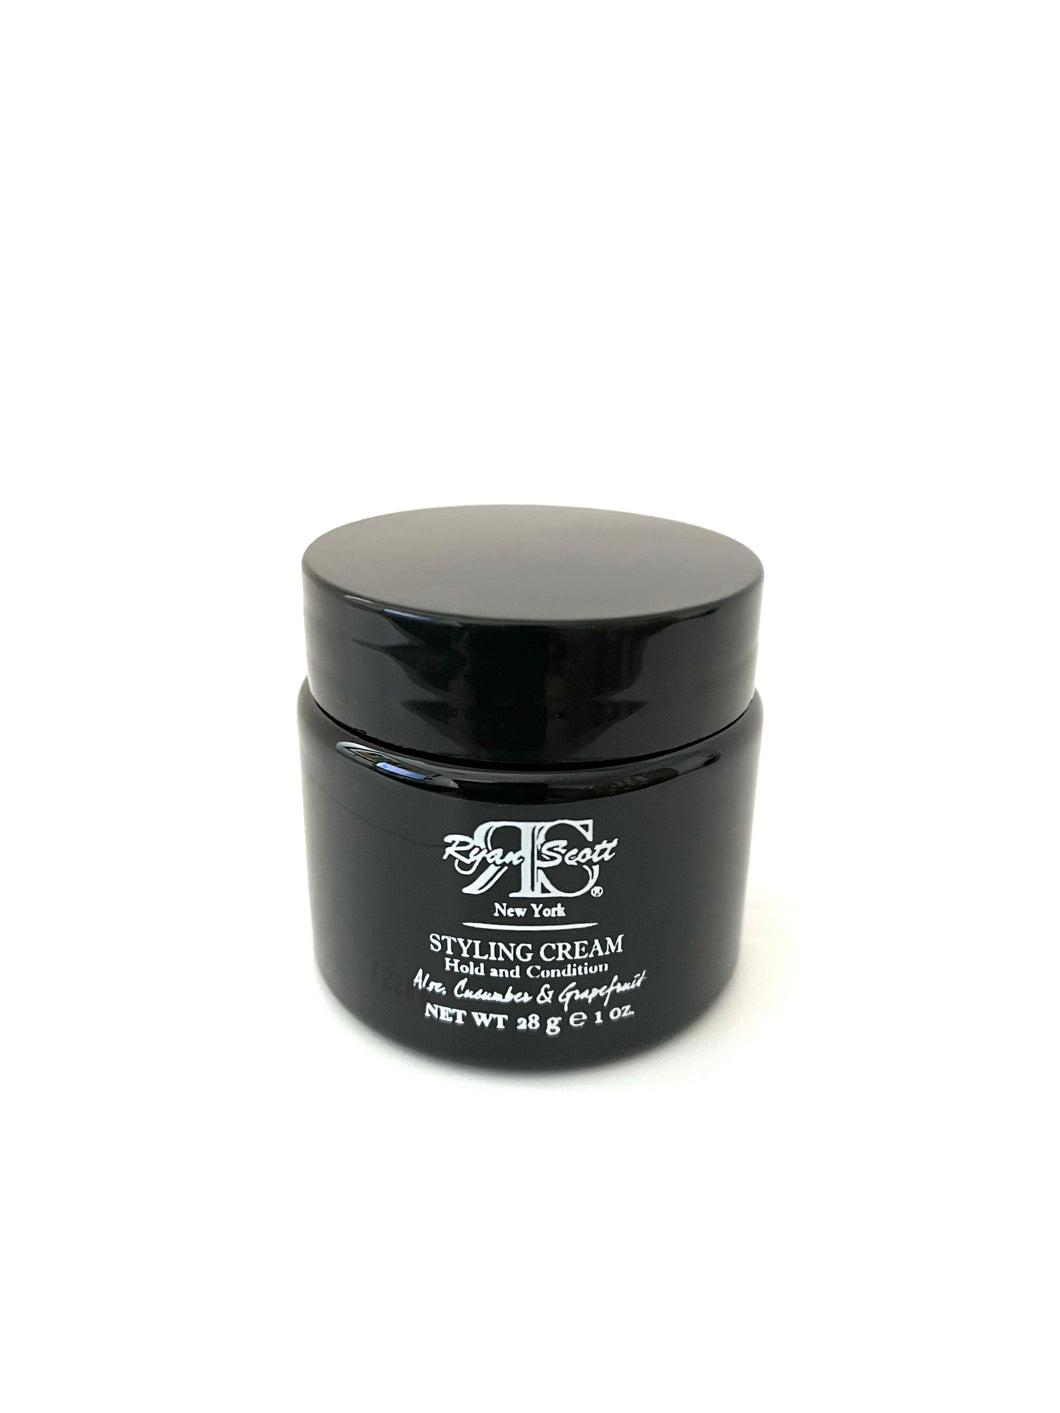 Styling Cream - Hold & Condition - Travel Size 1.0oz